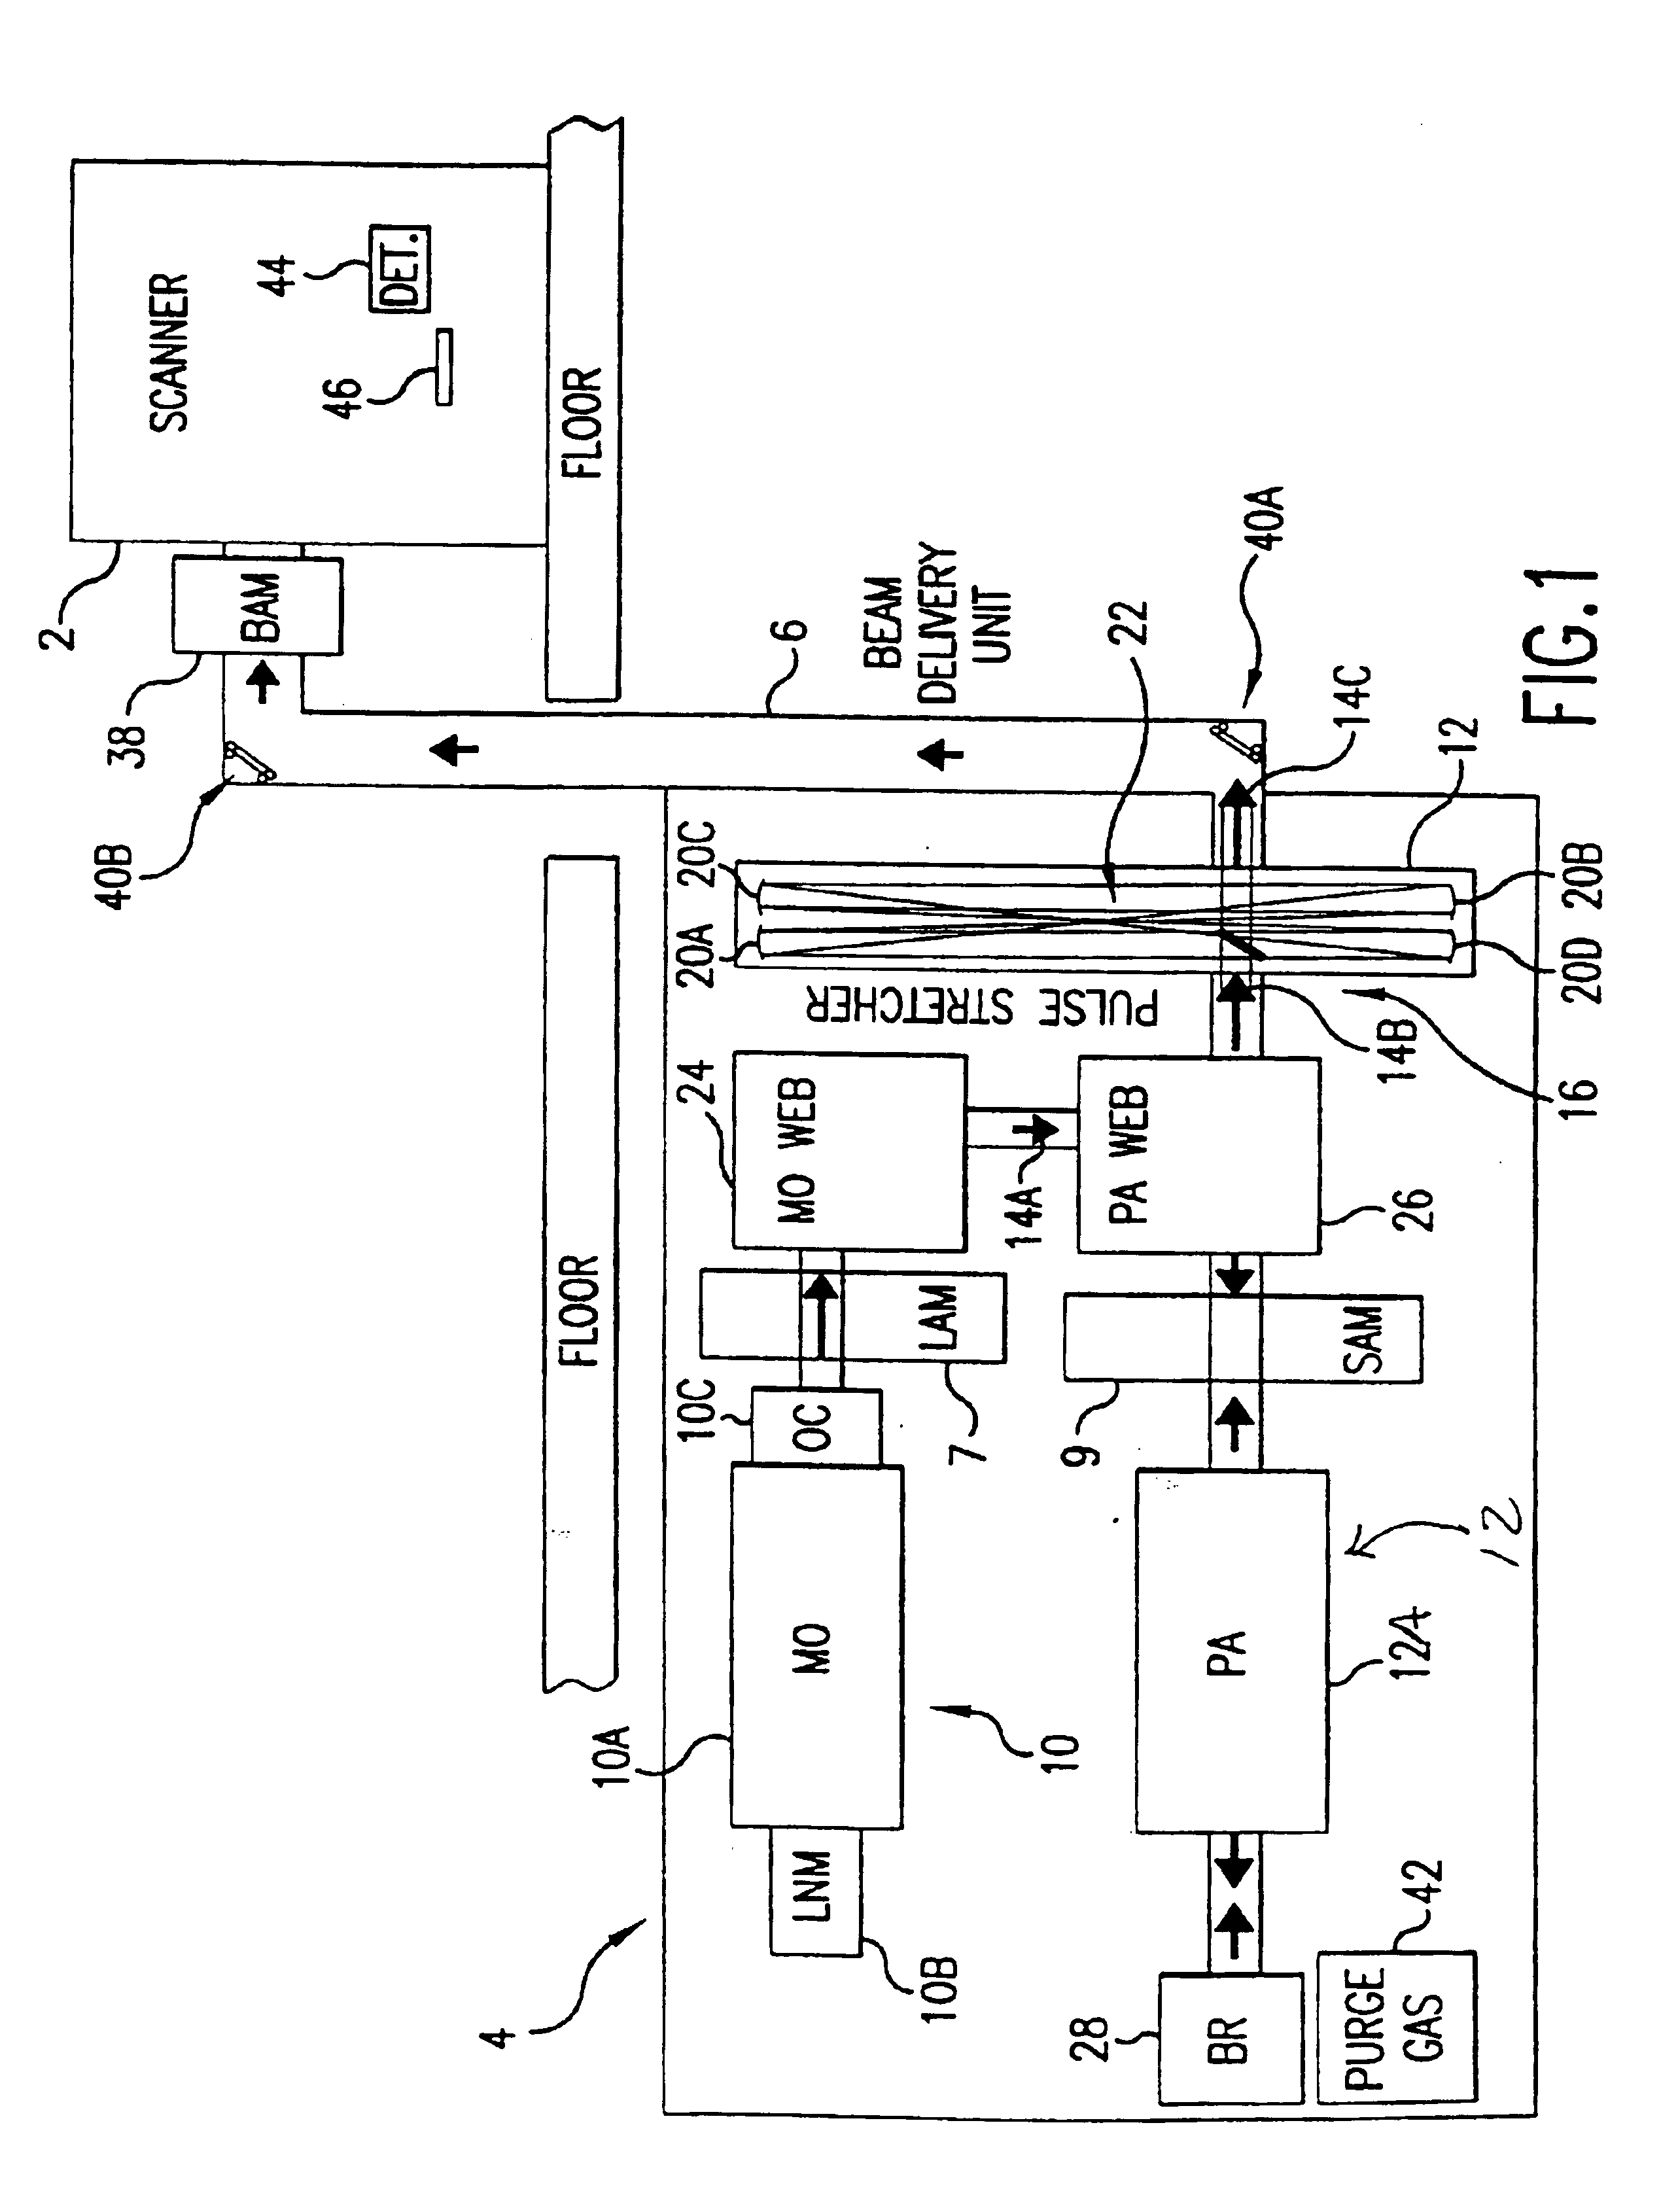 Control system for a two chamber gas discharge laser